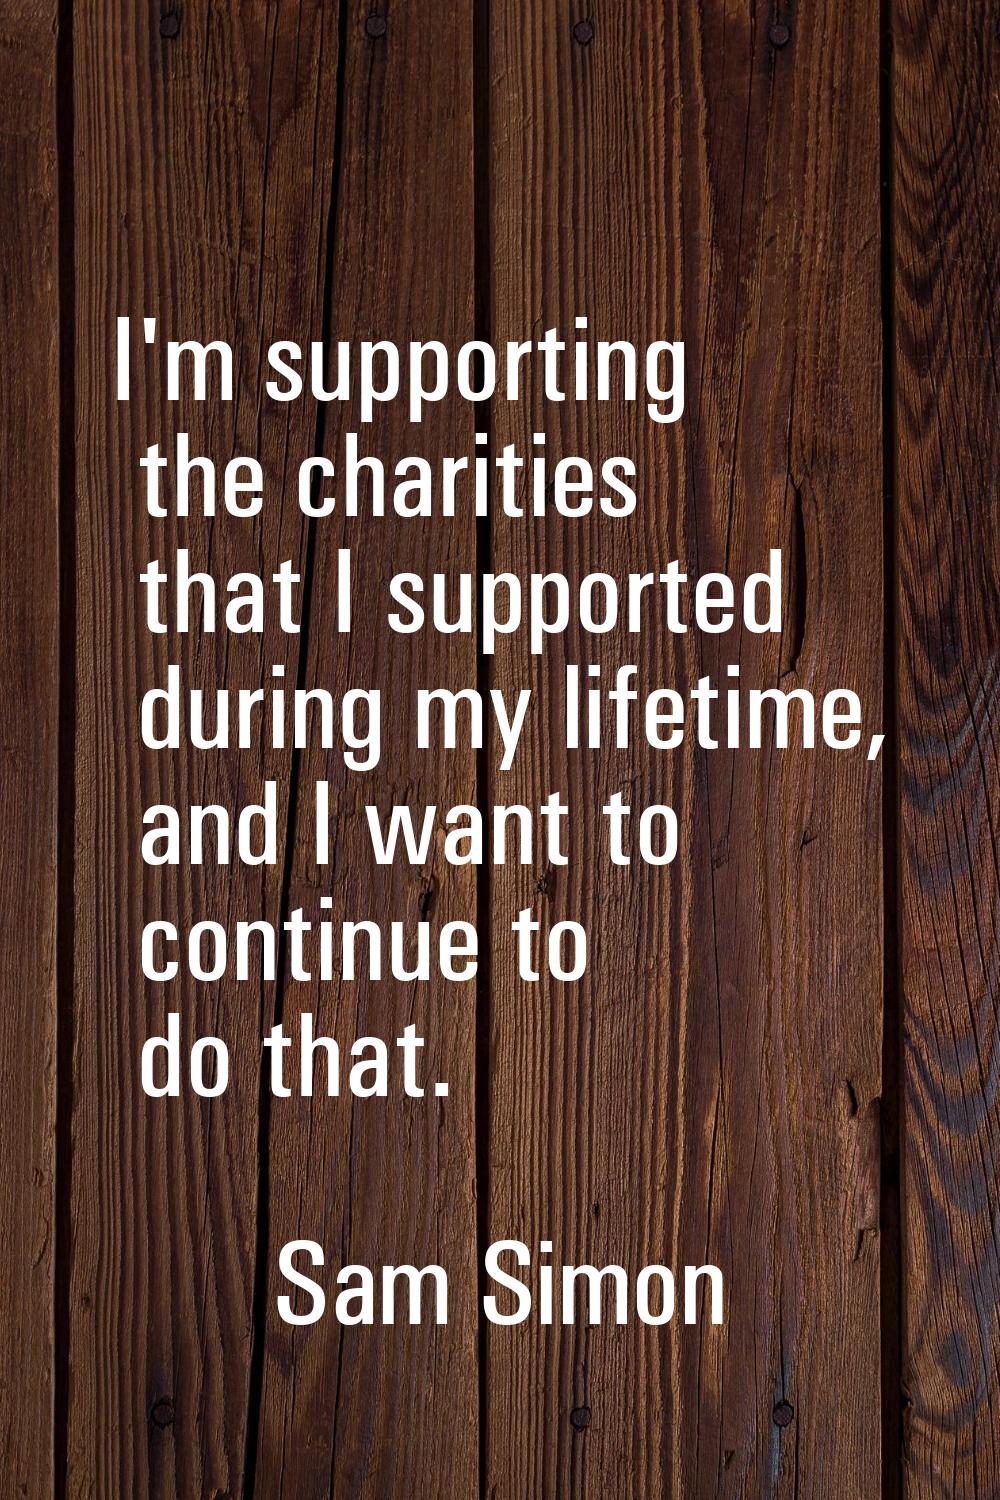 I'm supporting the charities that I supported during my lifetime, and I want to continue to do that